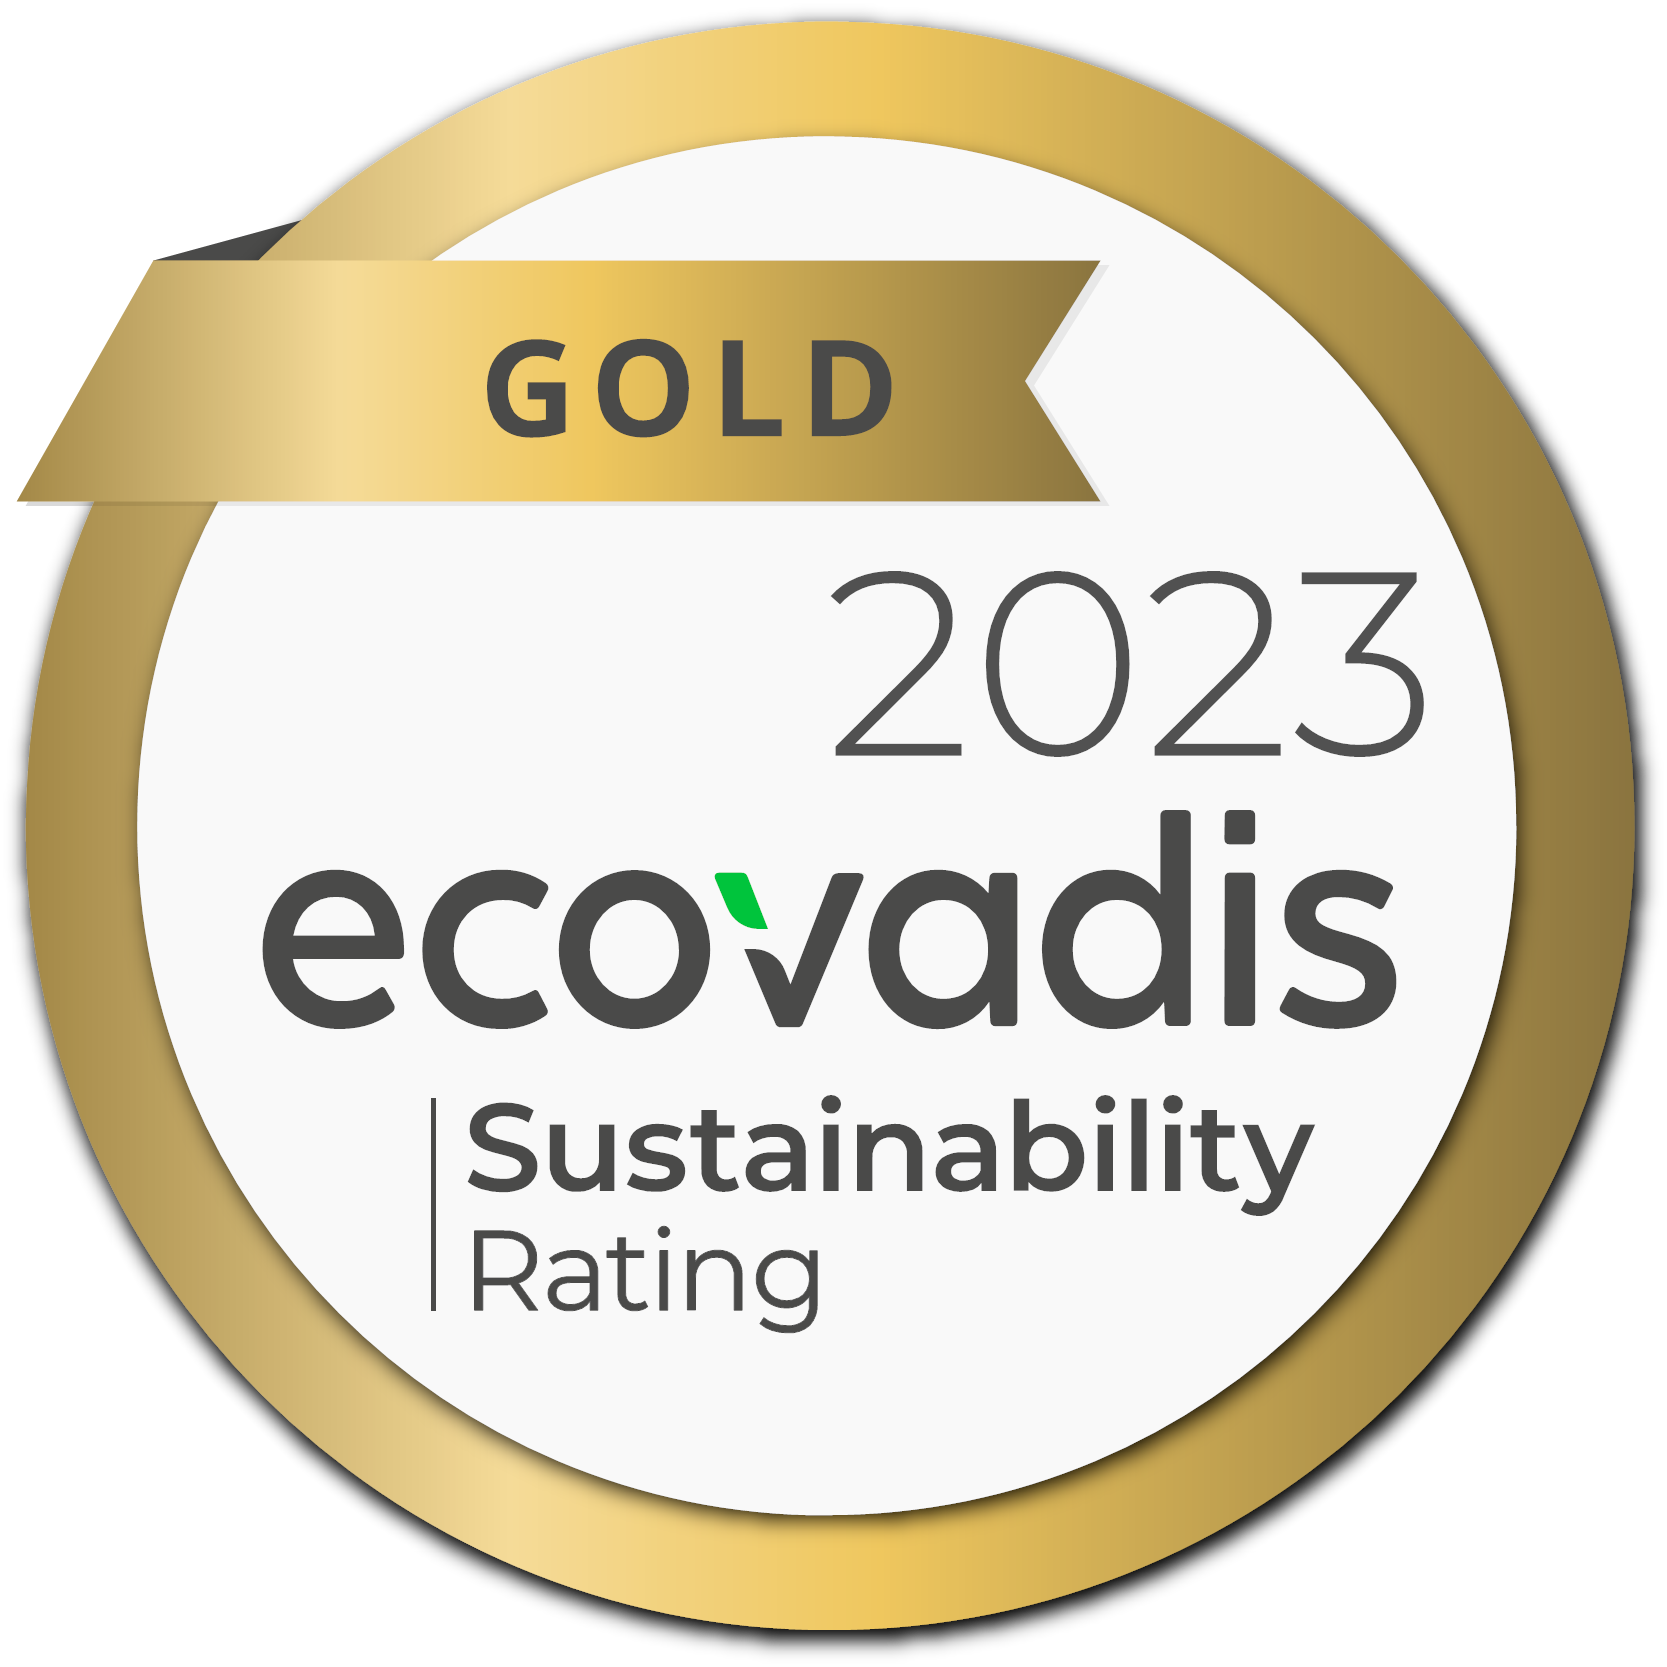 Ecovardis Gold Accreditation by Ball & Young